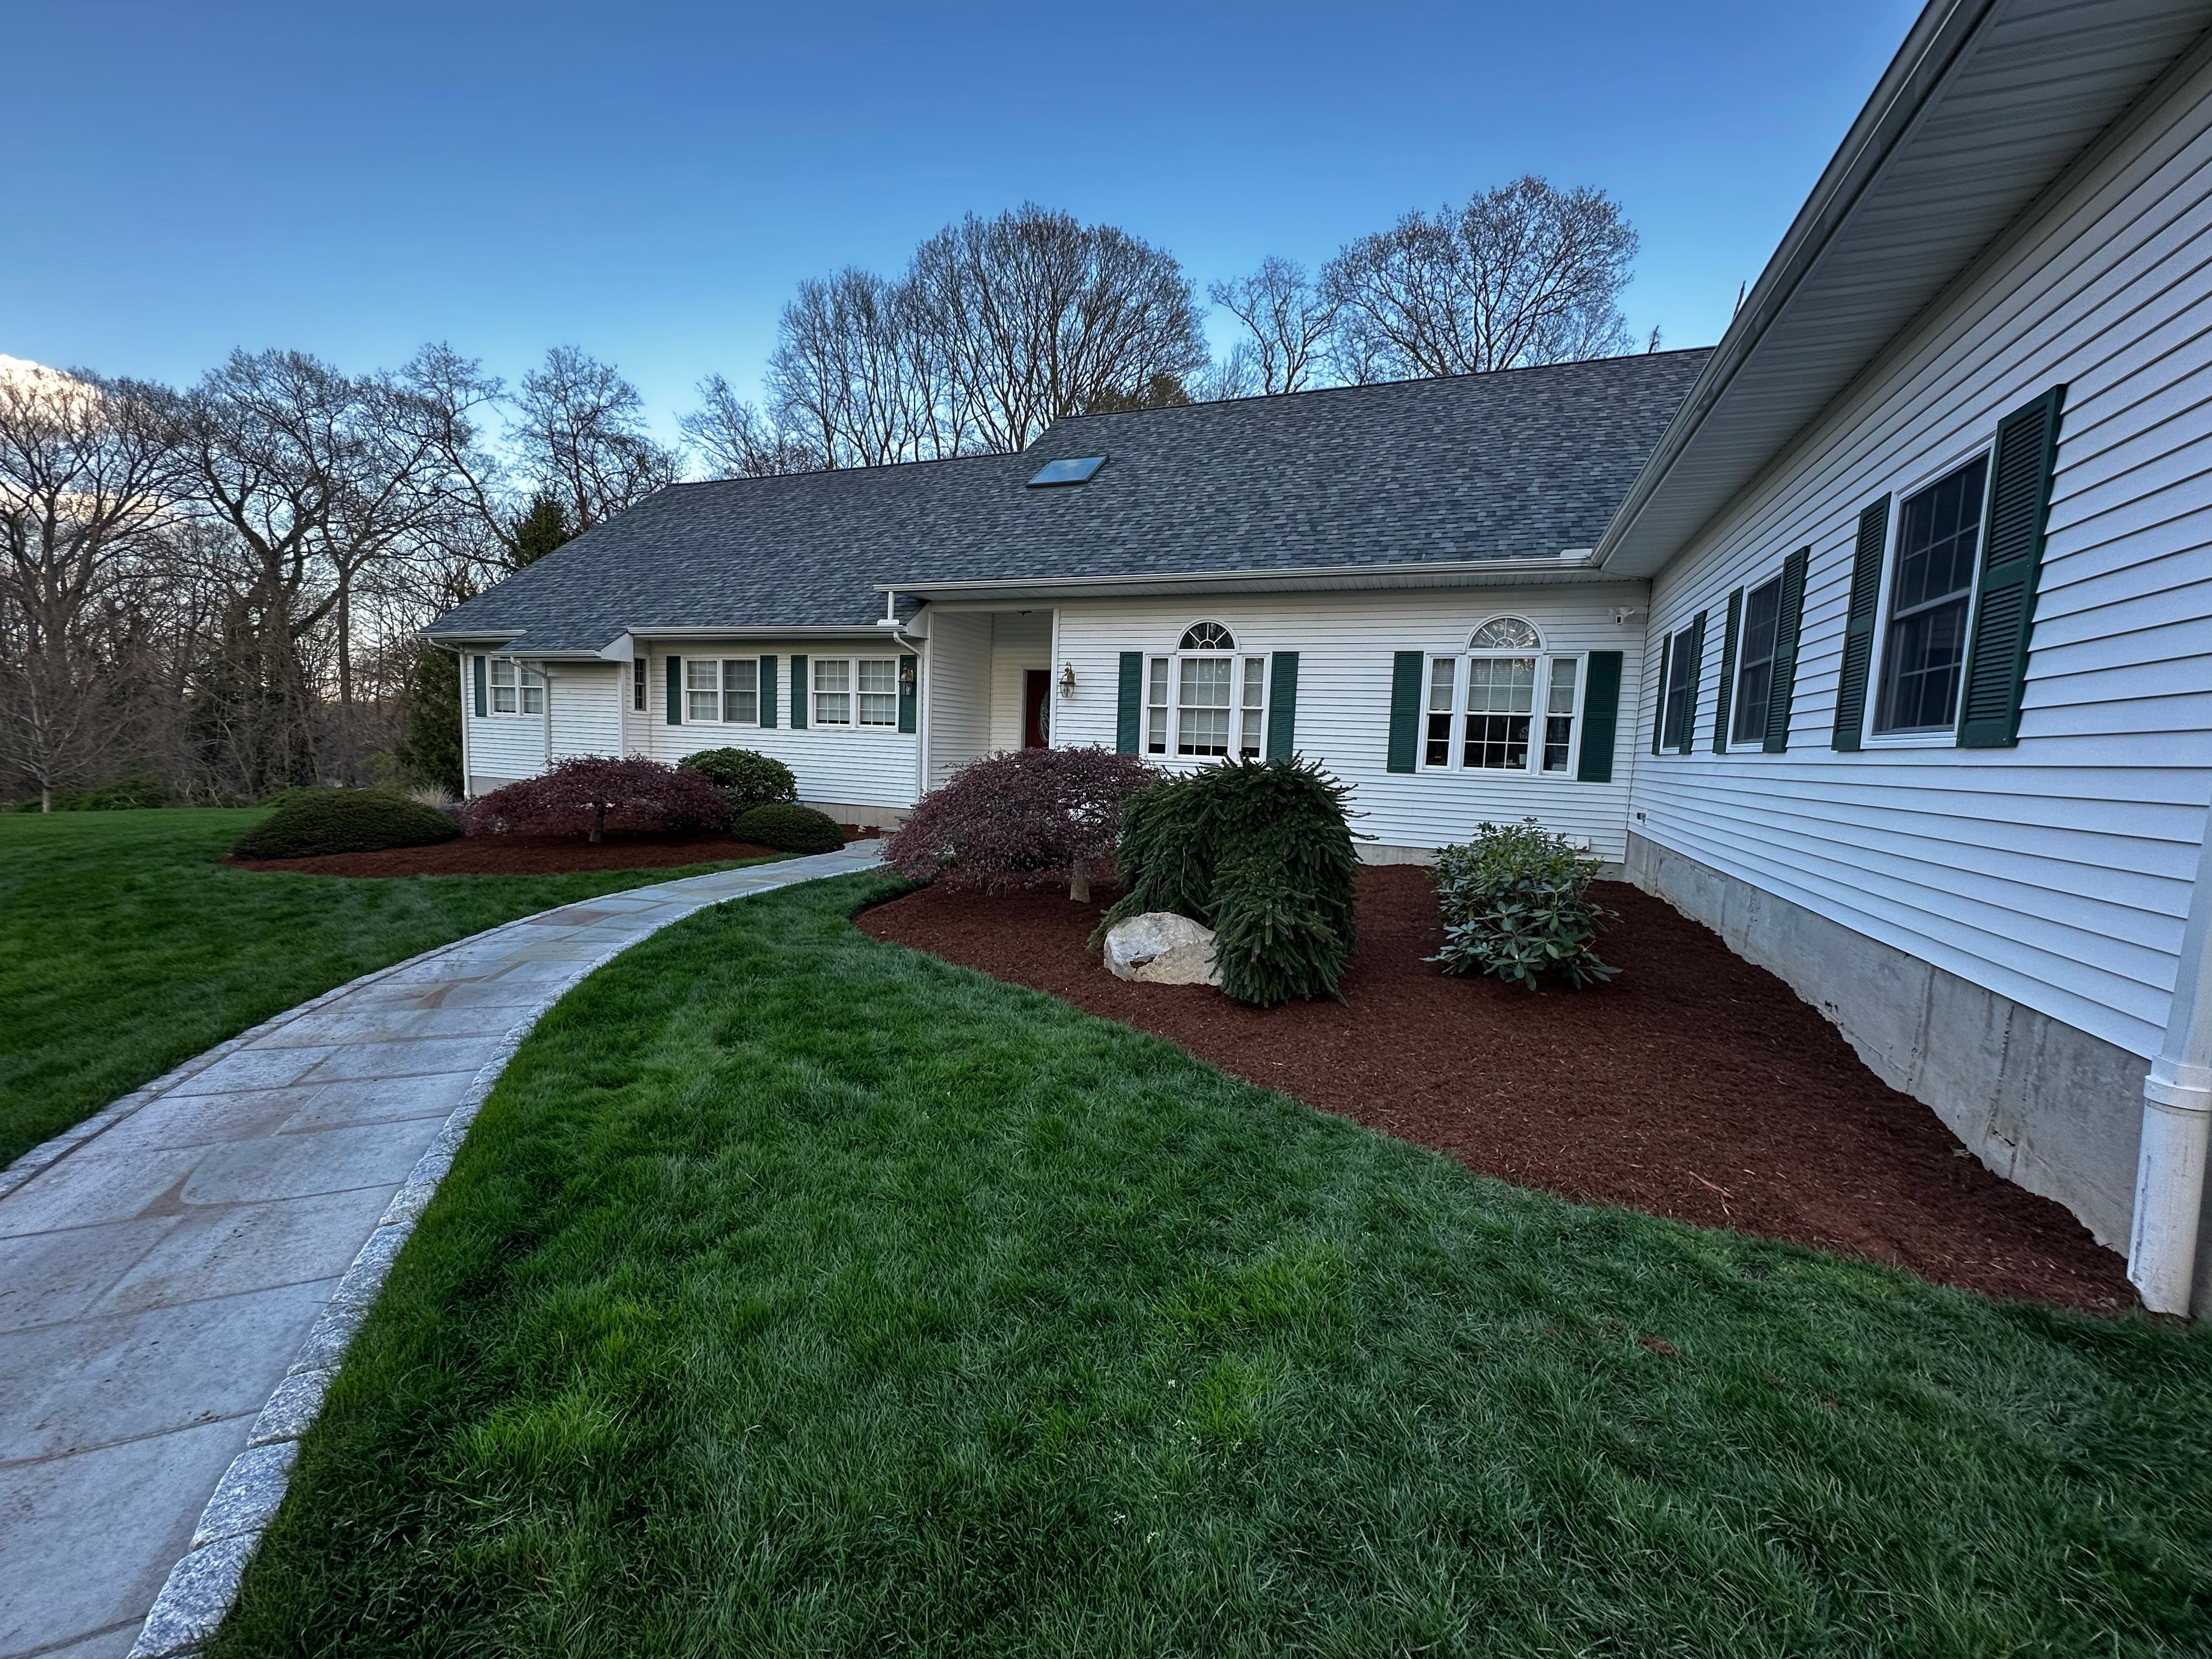 All Photos for Ace Landscaping in Trumbull, CT